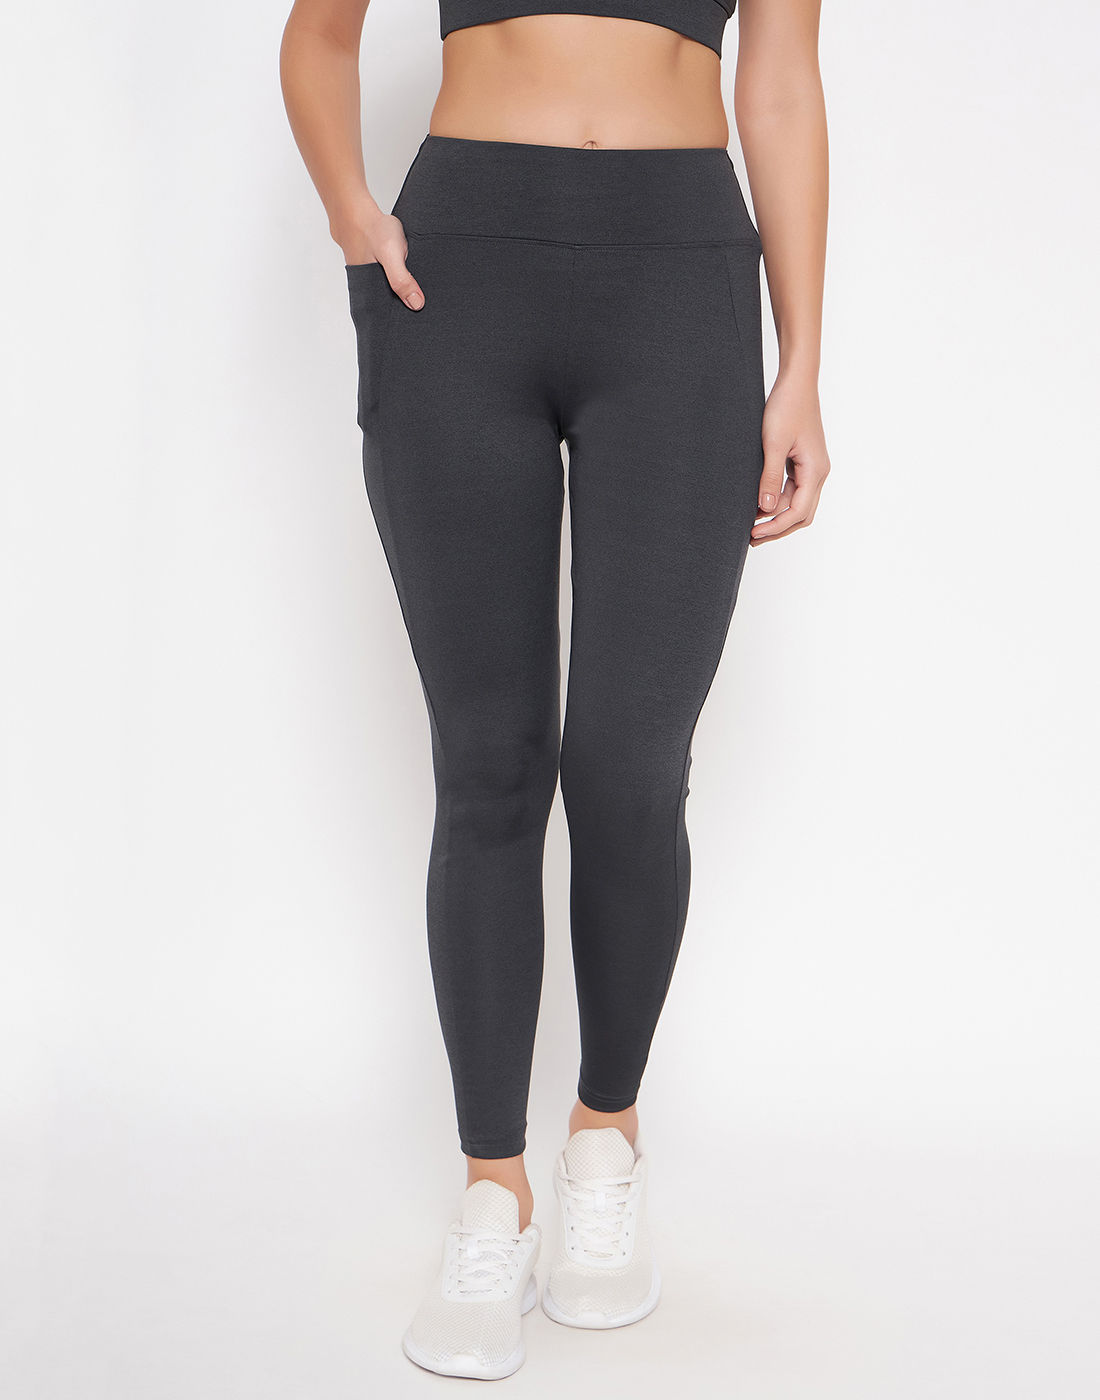 Buy Lucky Chico High Waisted Yoga Workout Leggings for Women with Inner  Pocket, Black & Dark Grey, Large at Amazon.in